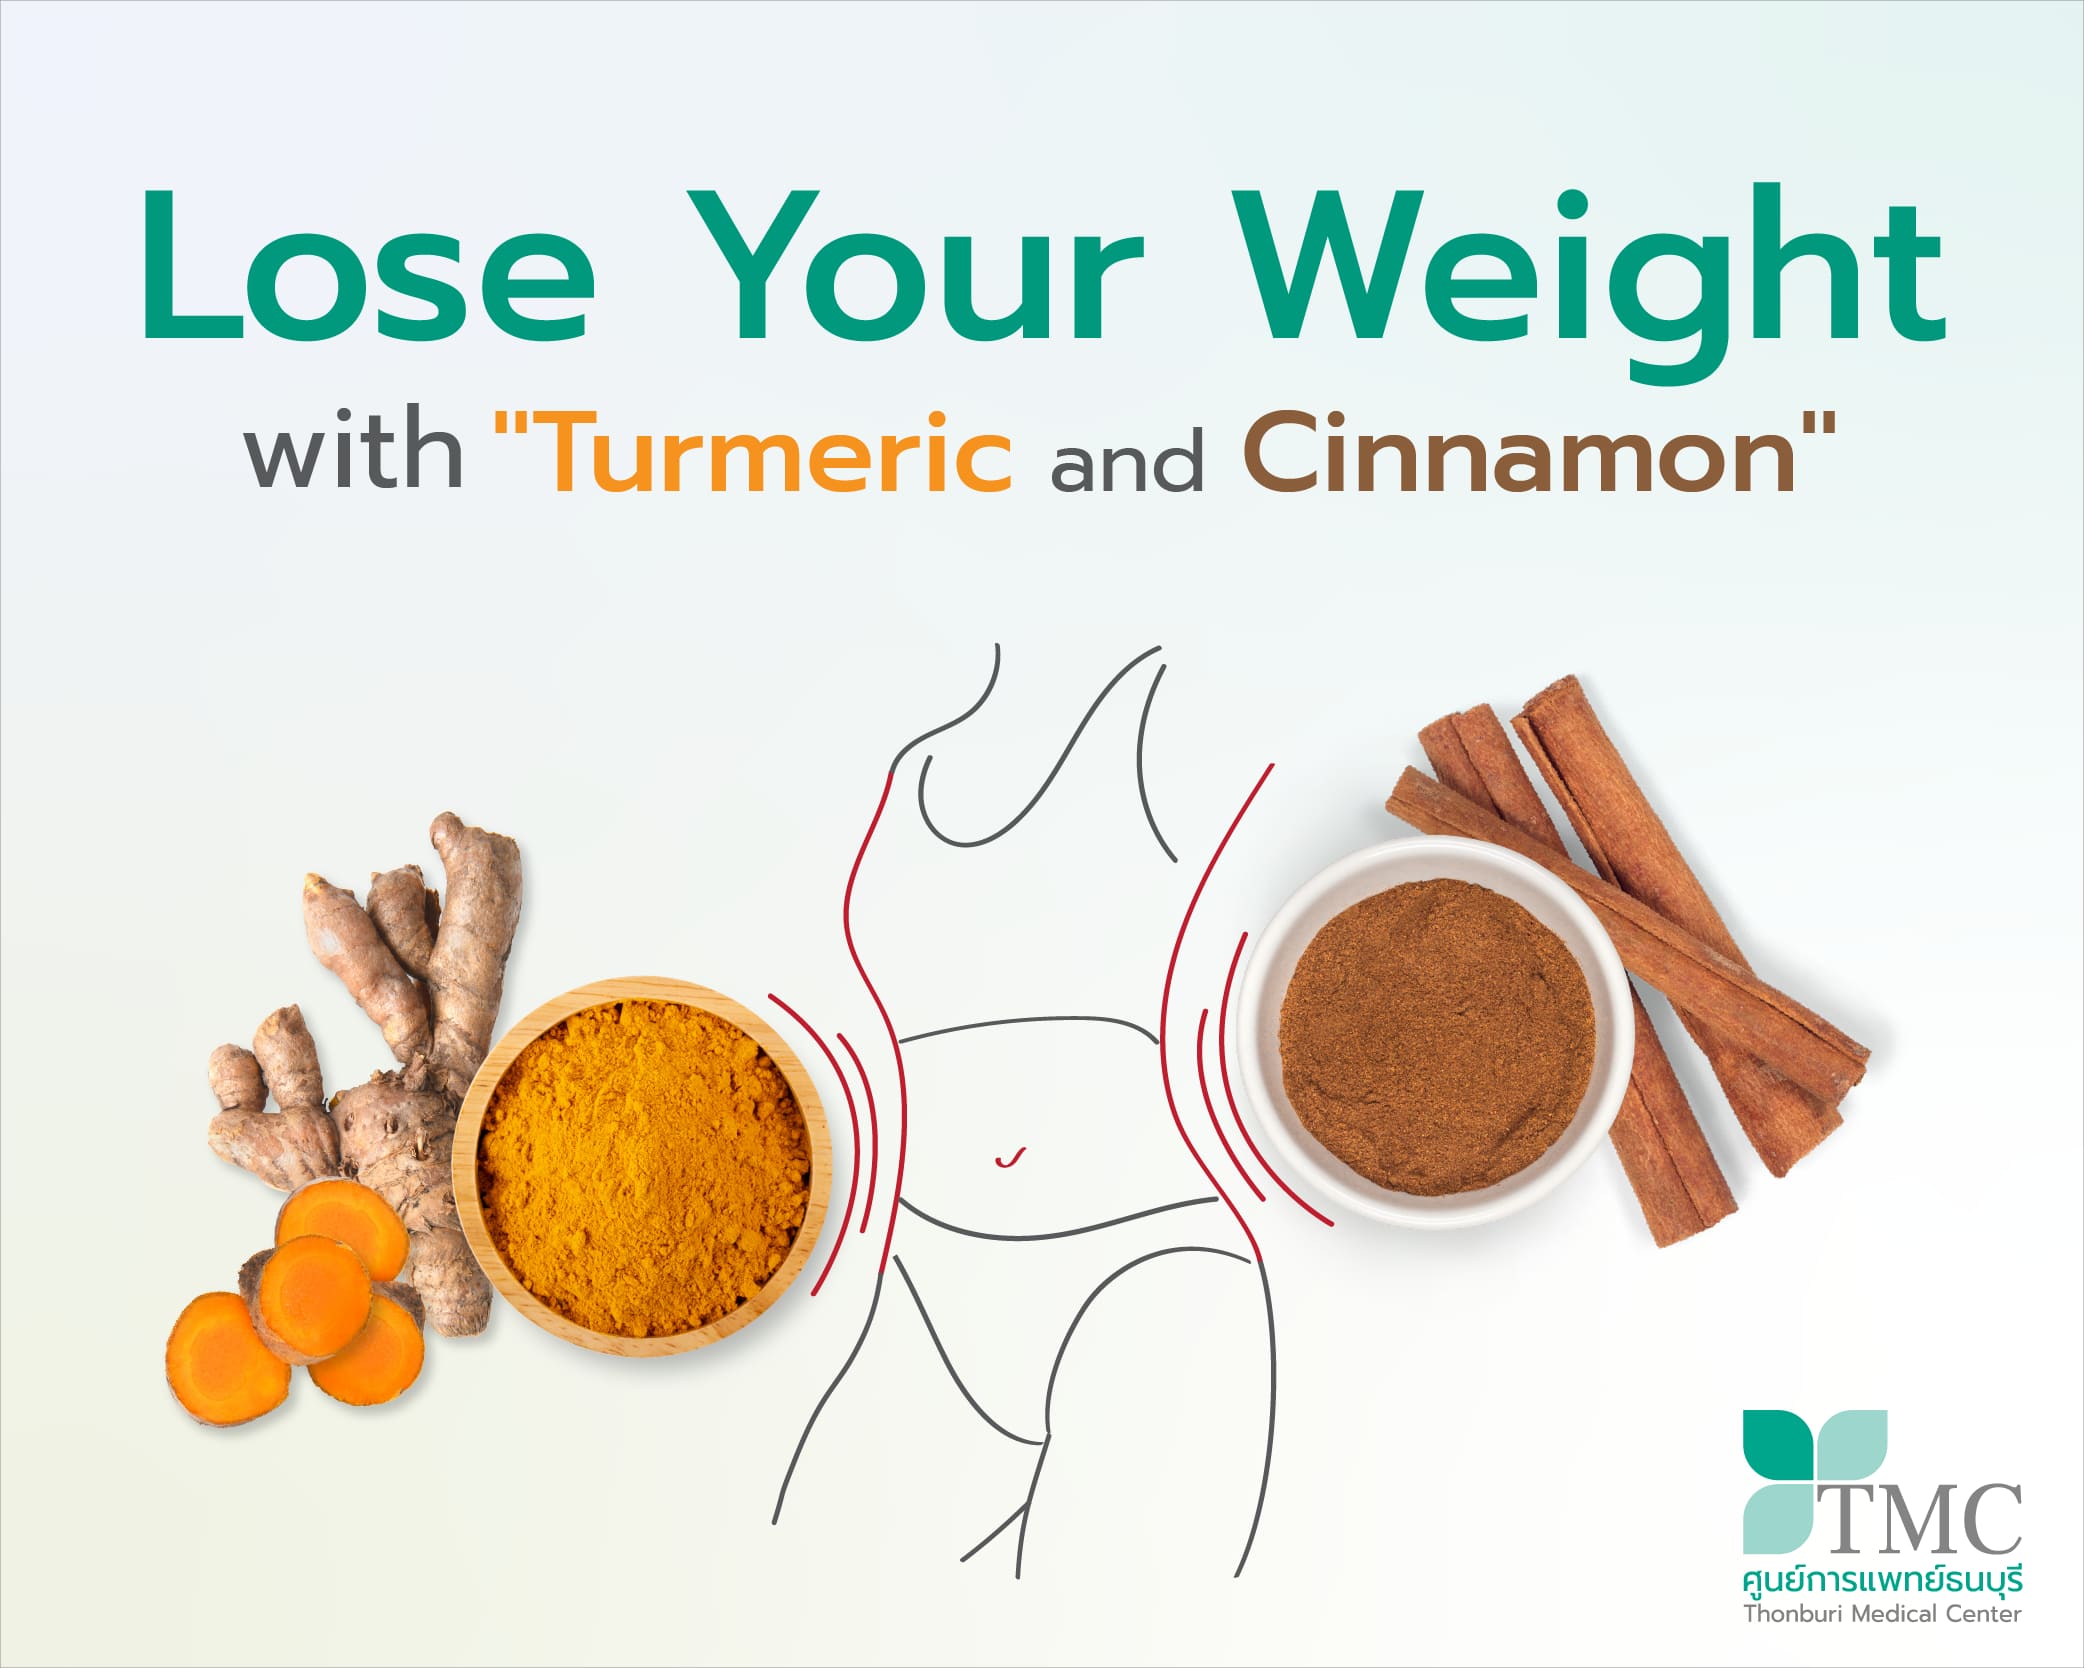 Lose Your Weight with Turmeric and Cinnamon